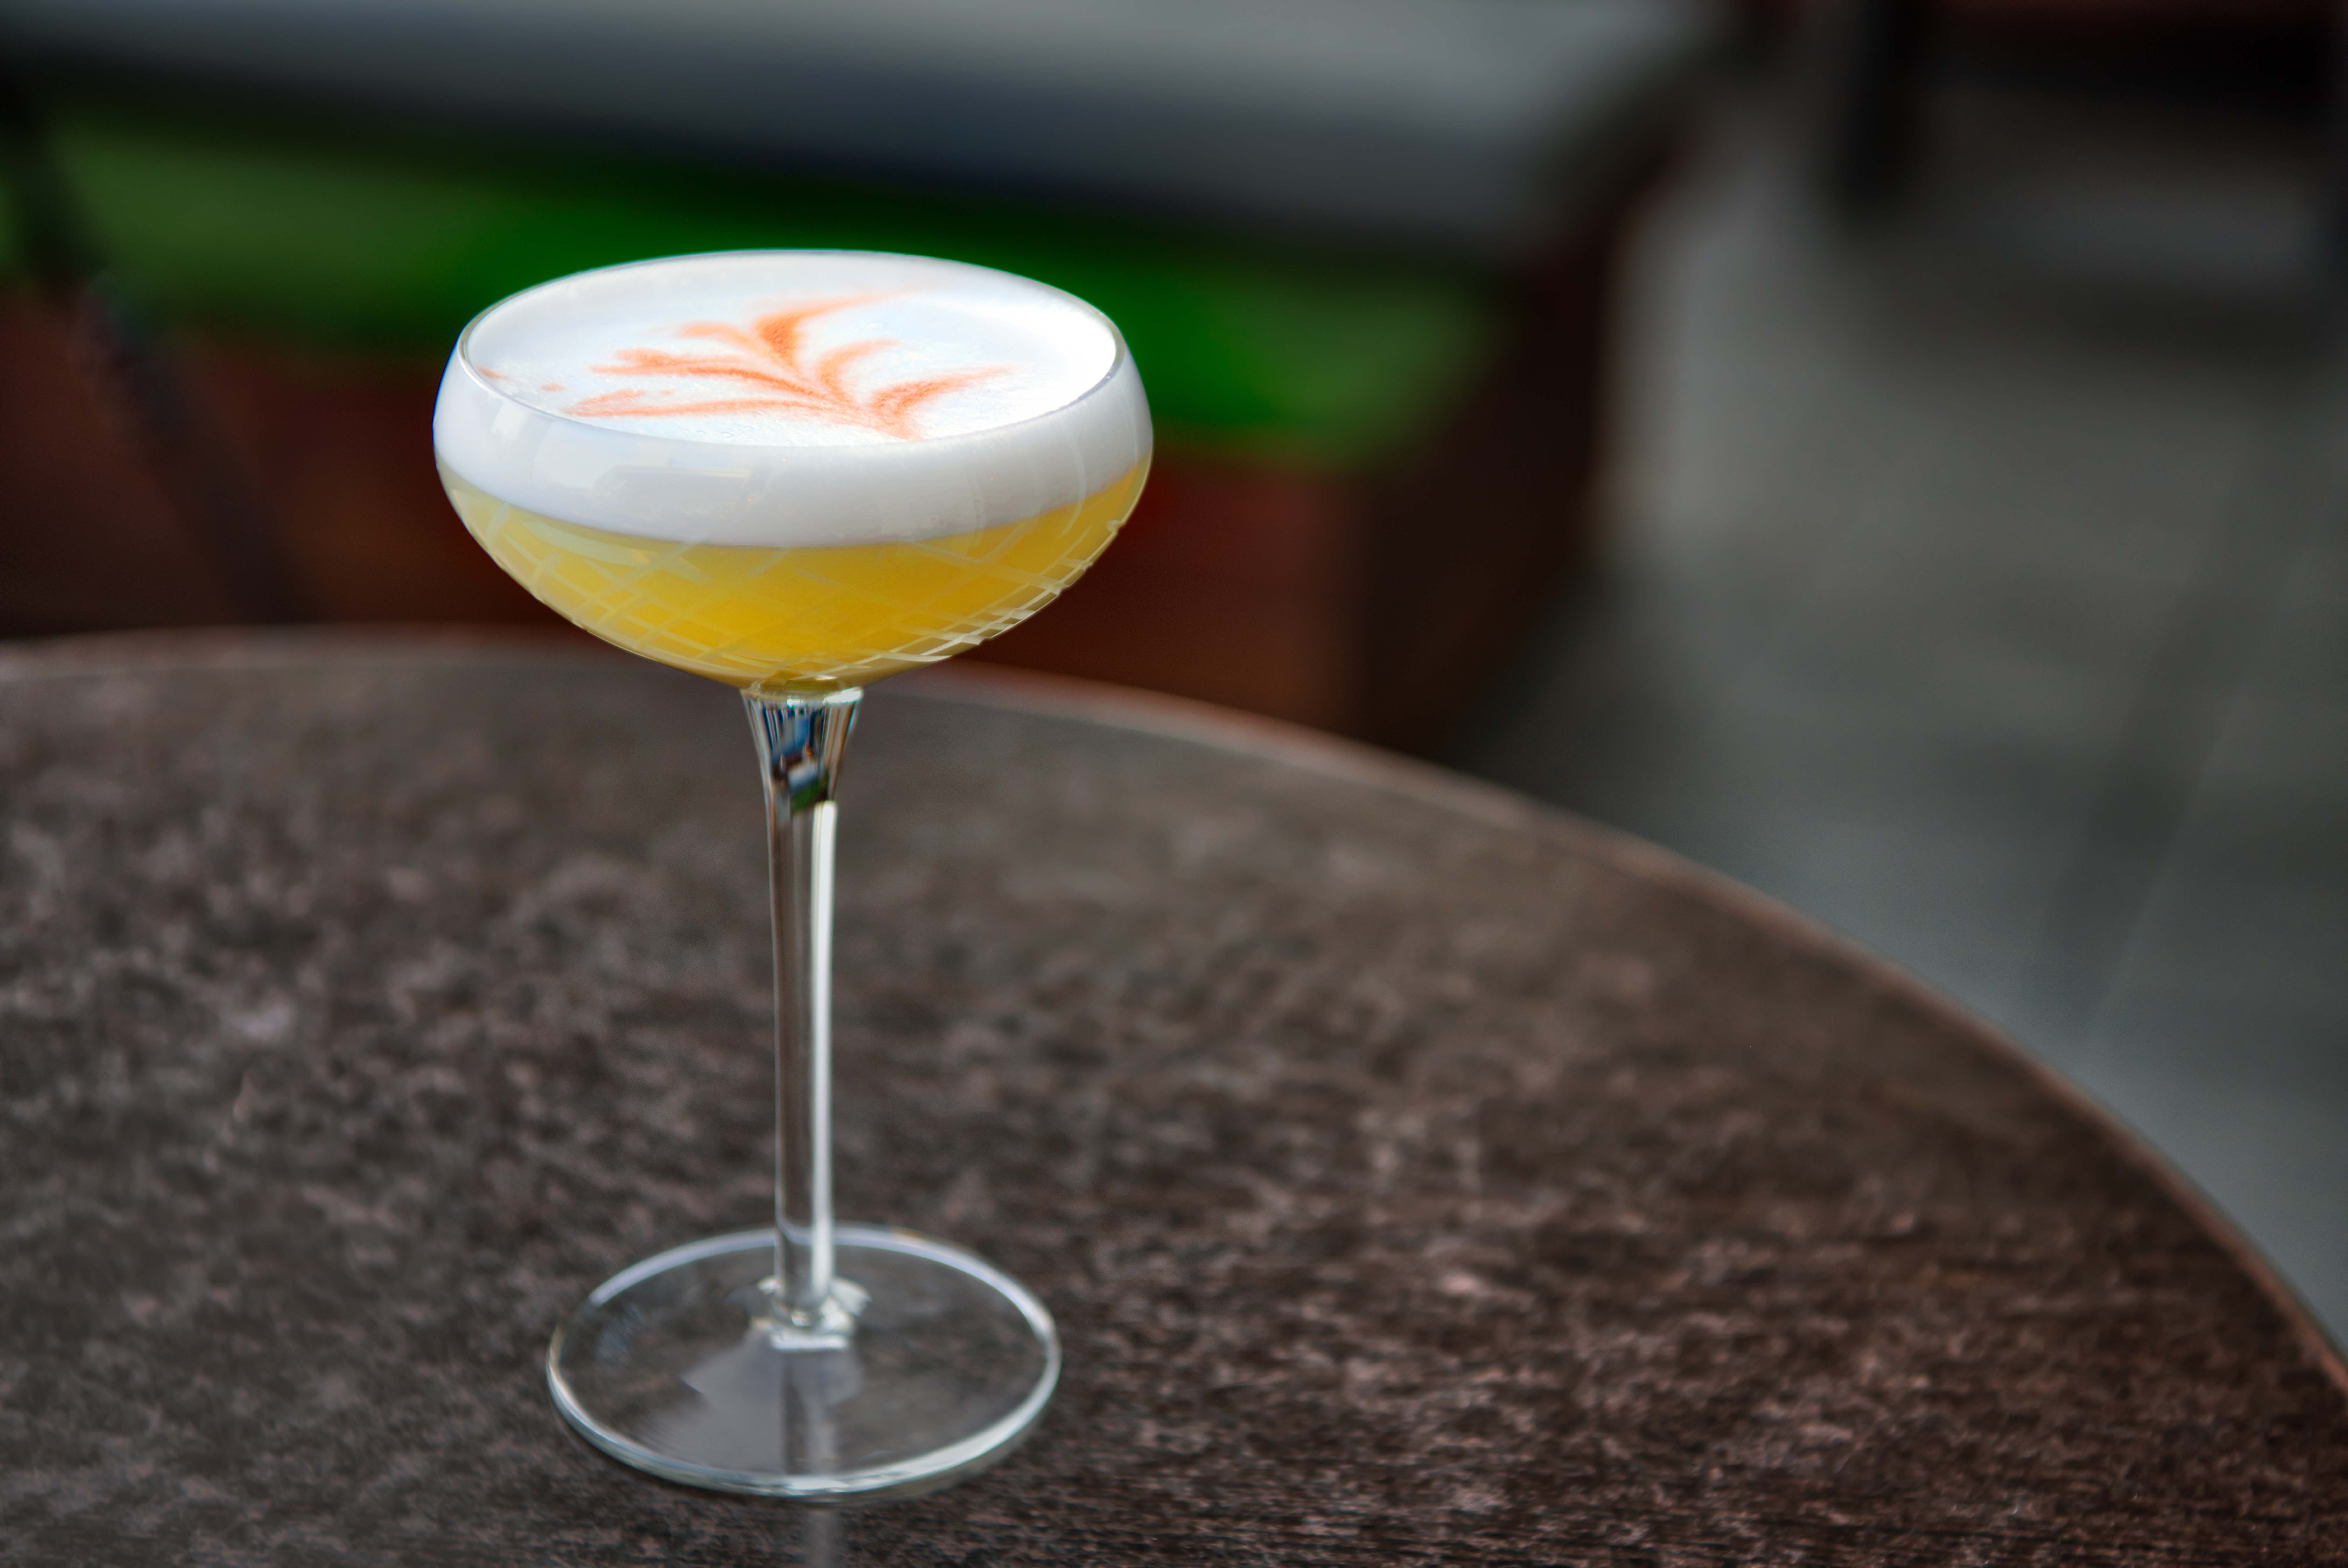 Vibrant yellow cocktail with decorative foam in long-stemmed coupe glass